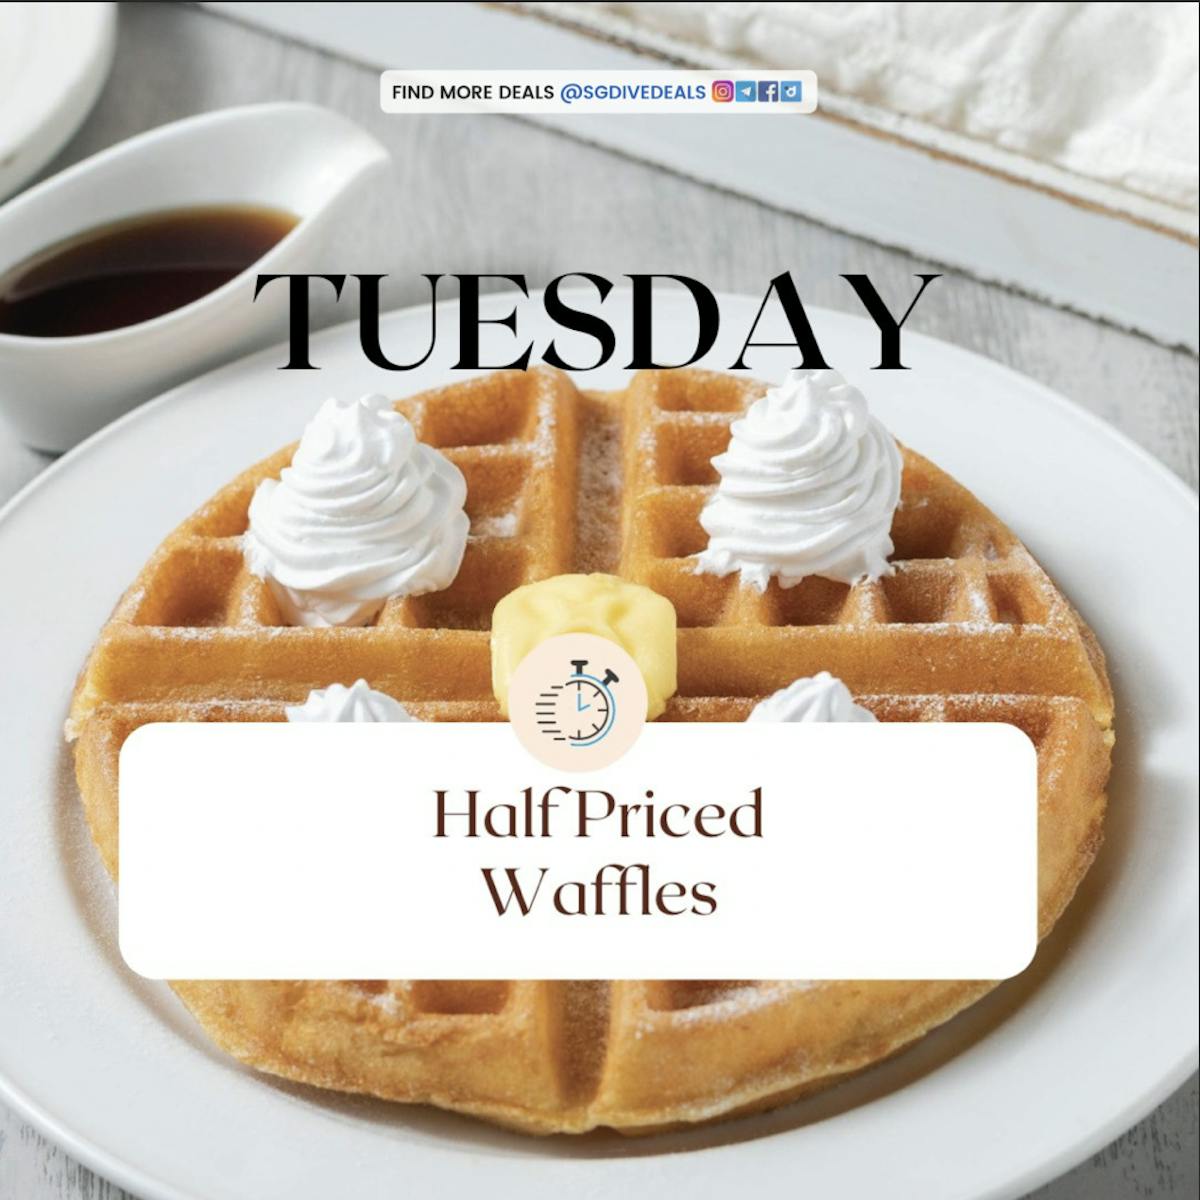 half-priced waffles for all diners every Tuesday